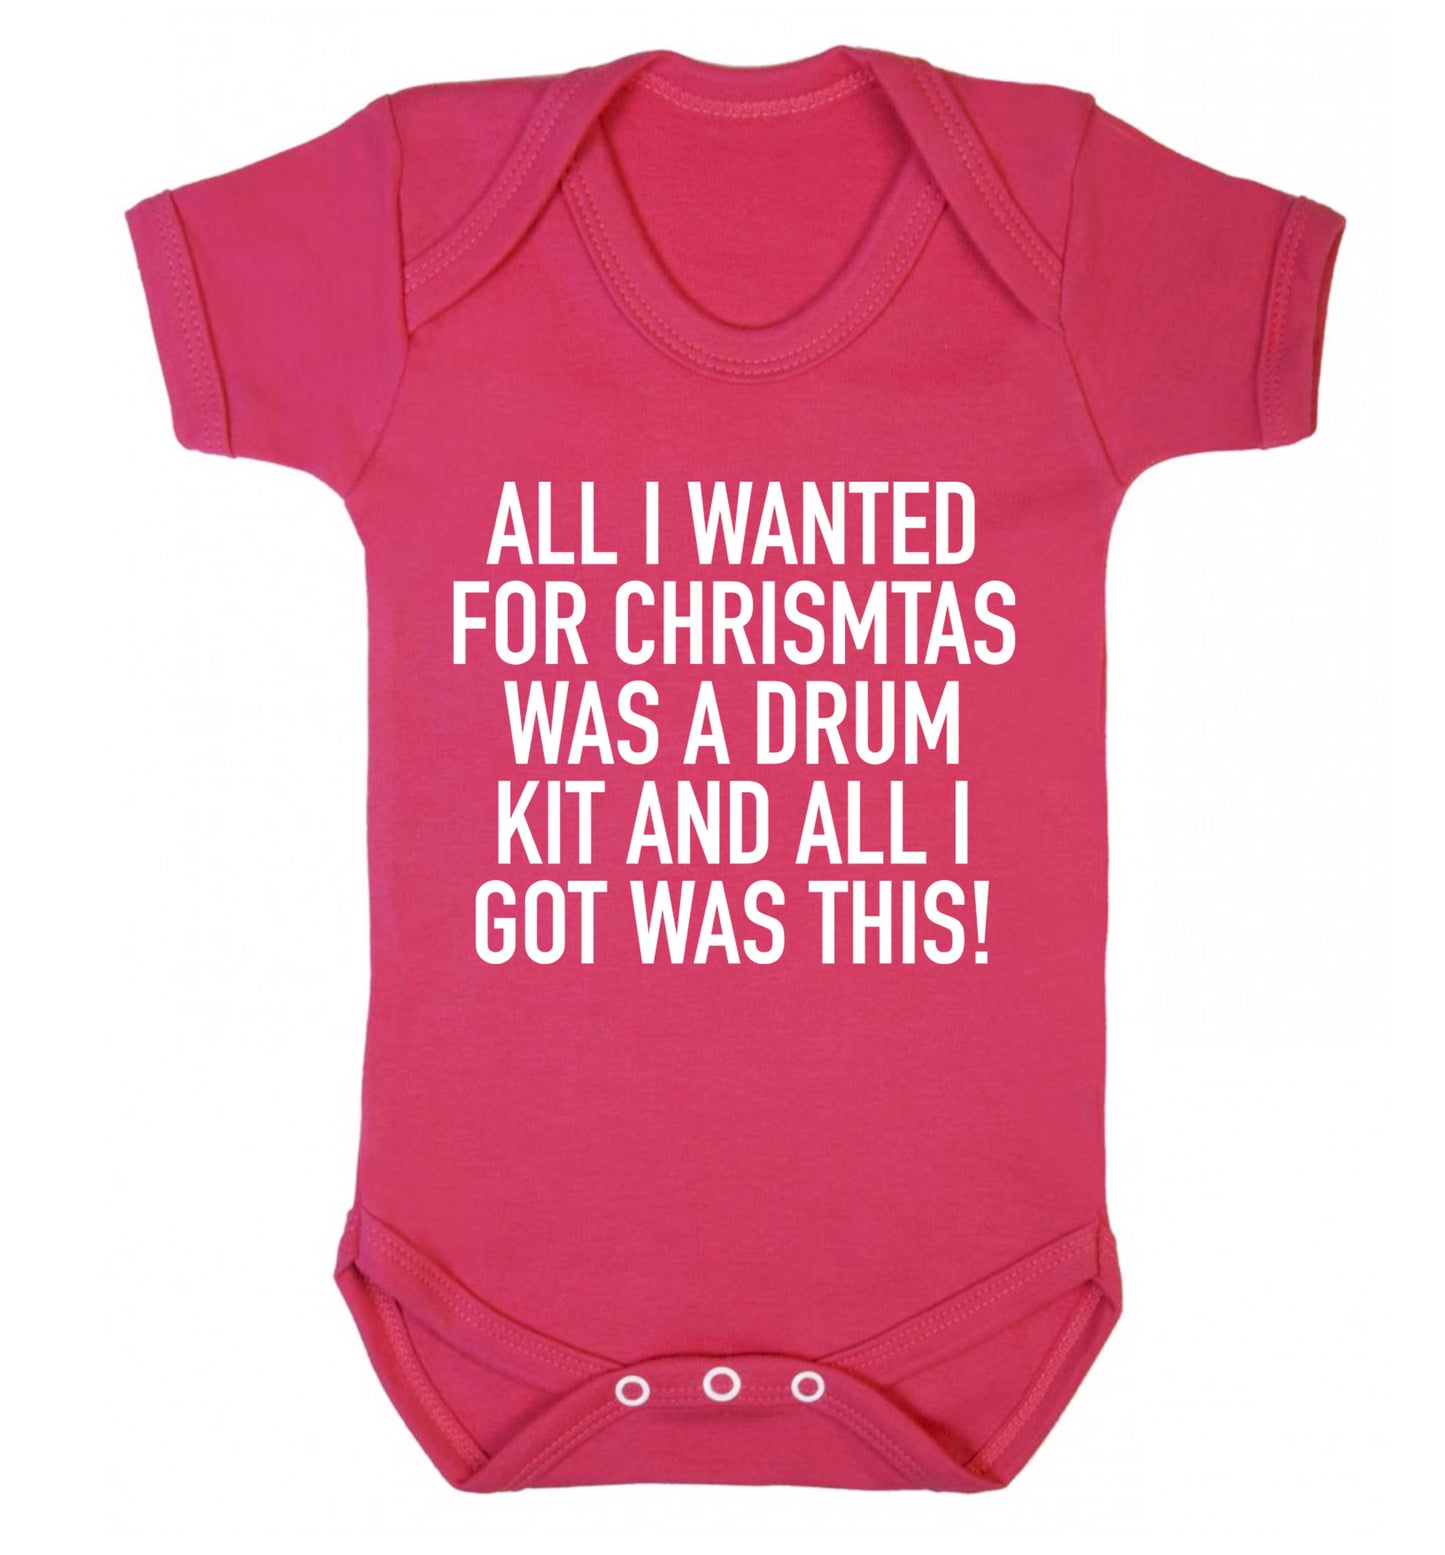 All I wanted for Christmas was a drum kit and all I got was this! Baby Vest dark pink 18-24 months